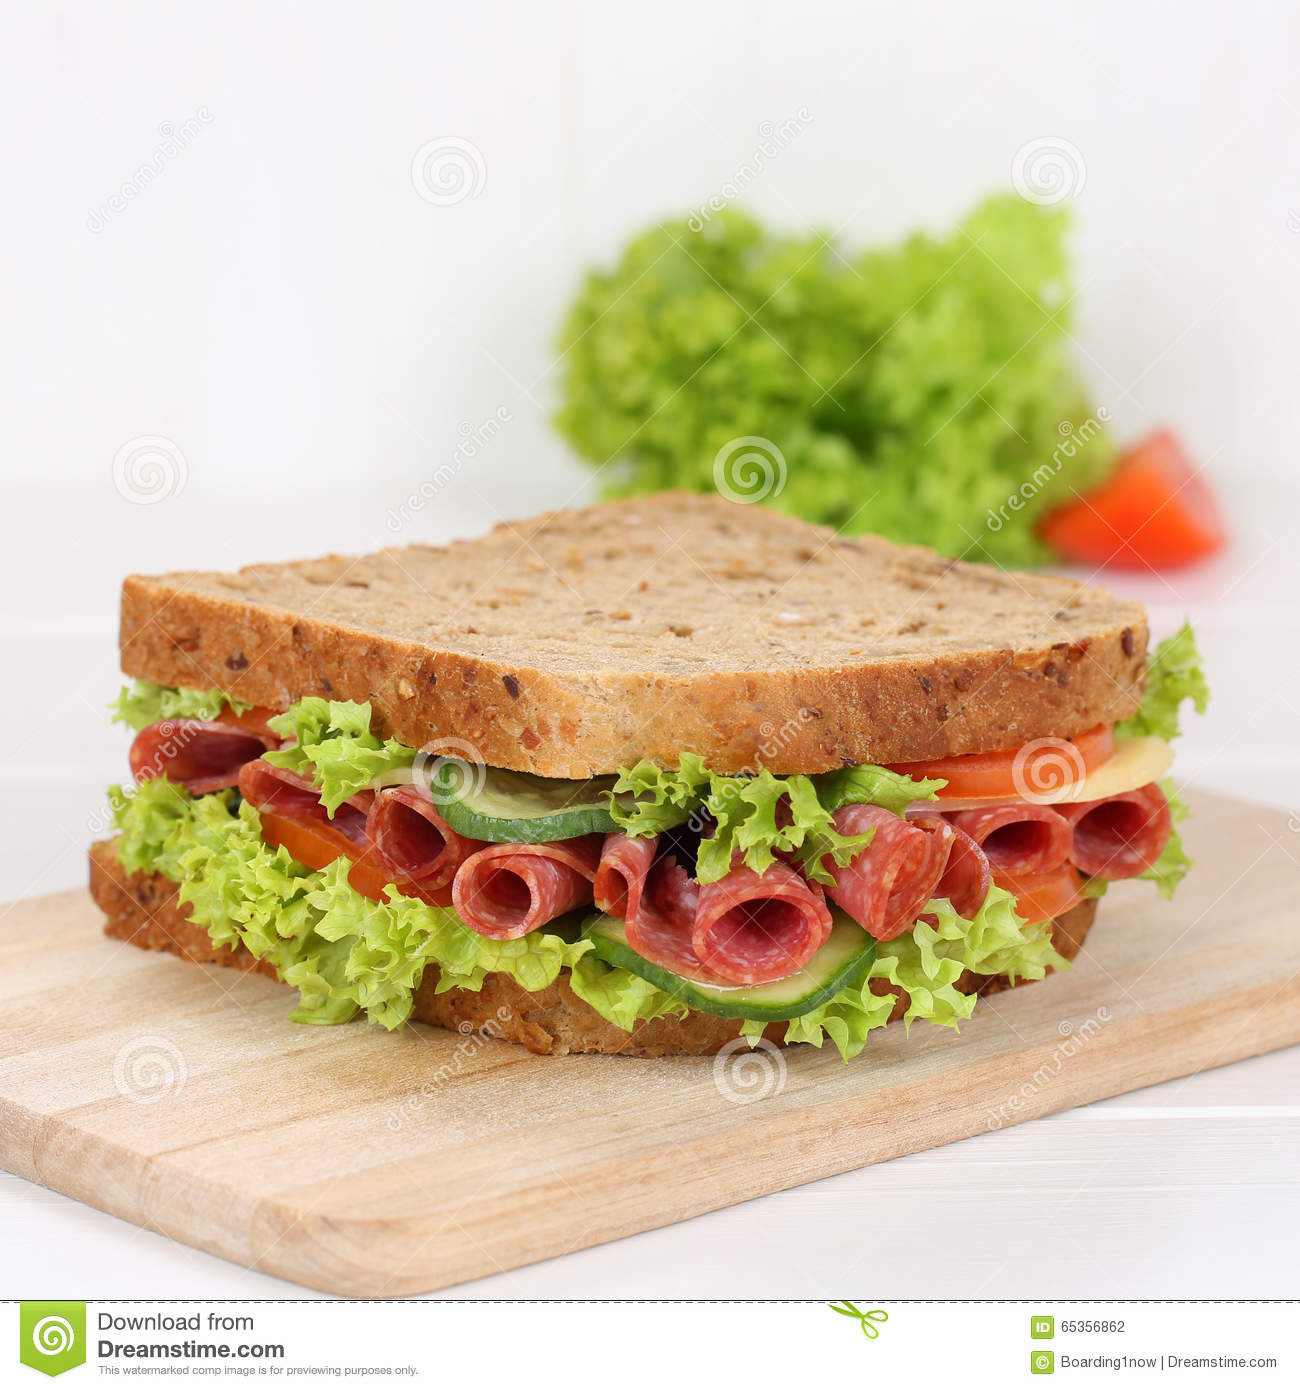 Is Toasted Bread Healthy
 Healthy Eating Sandwich Toast Bread For Breakfast With